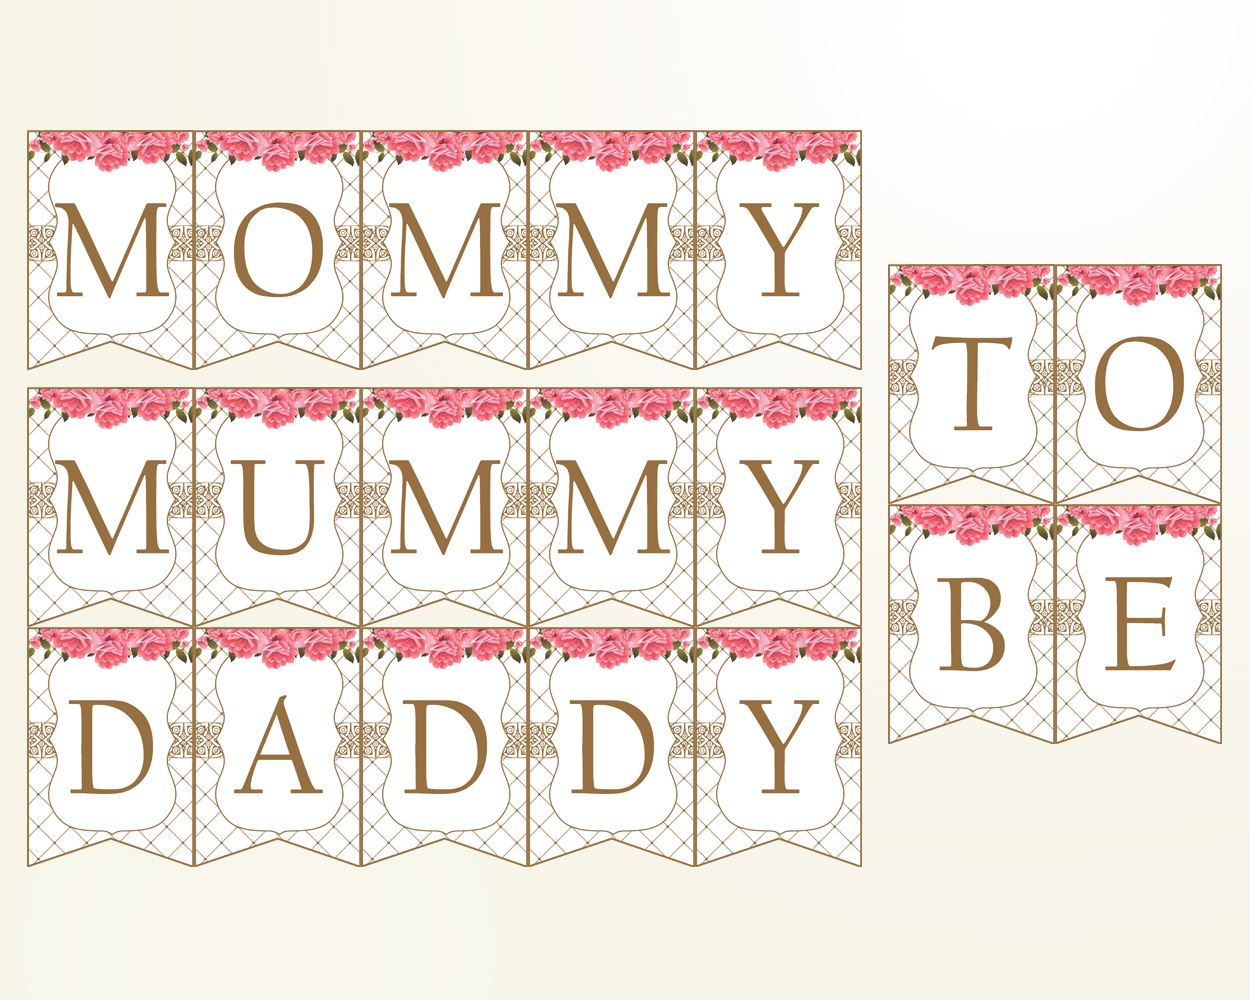 Chair Banner Baby Shower Chair Banner Roses Baby Shower Chair Banner Baby Shower Roses Chair Banner Pink White printables prints U3FPX - Digital Product